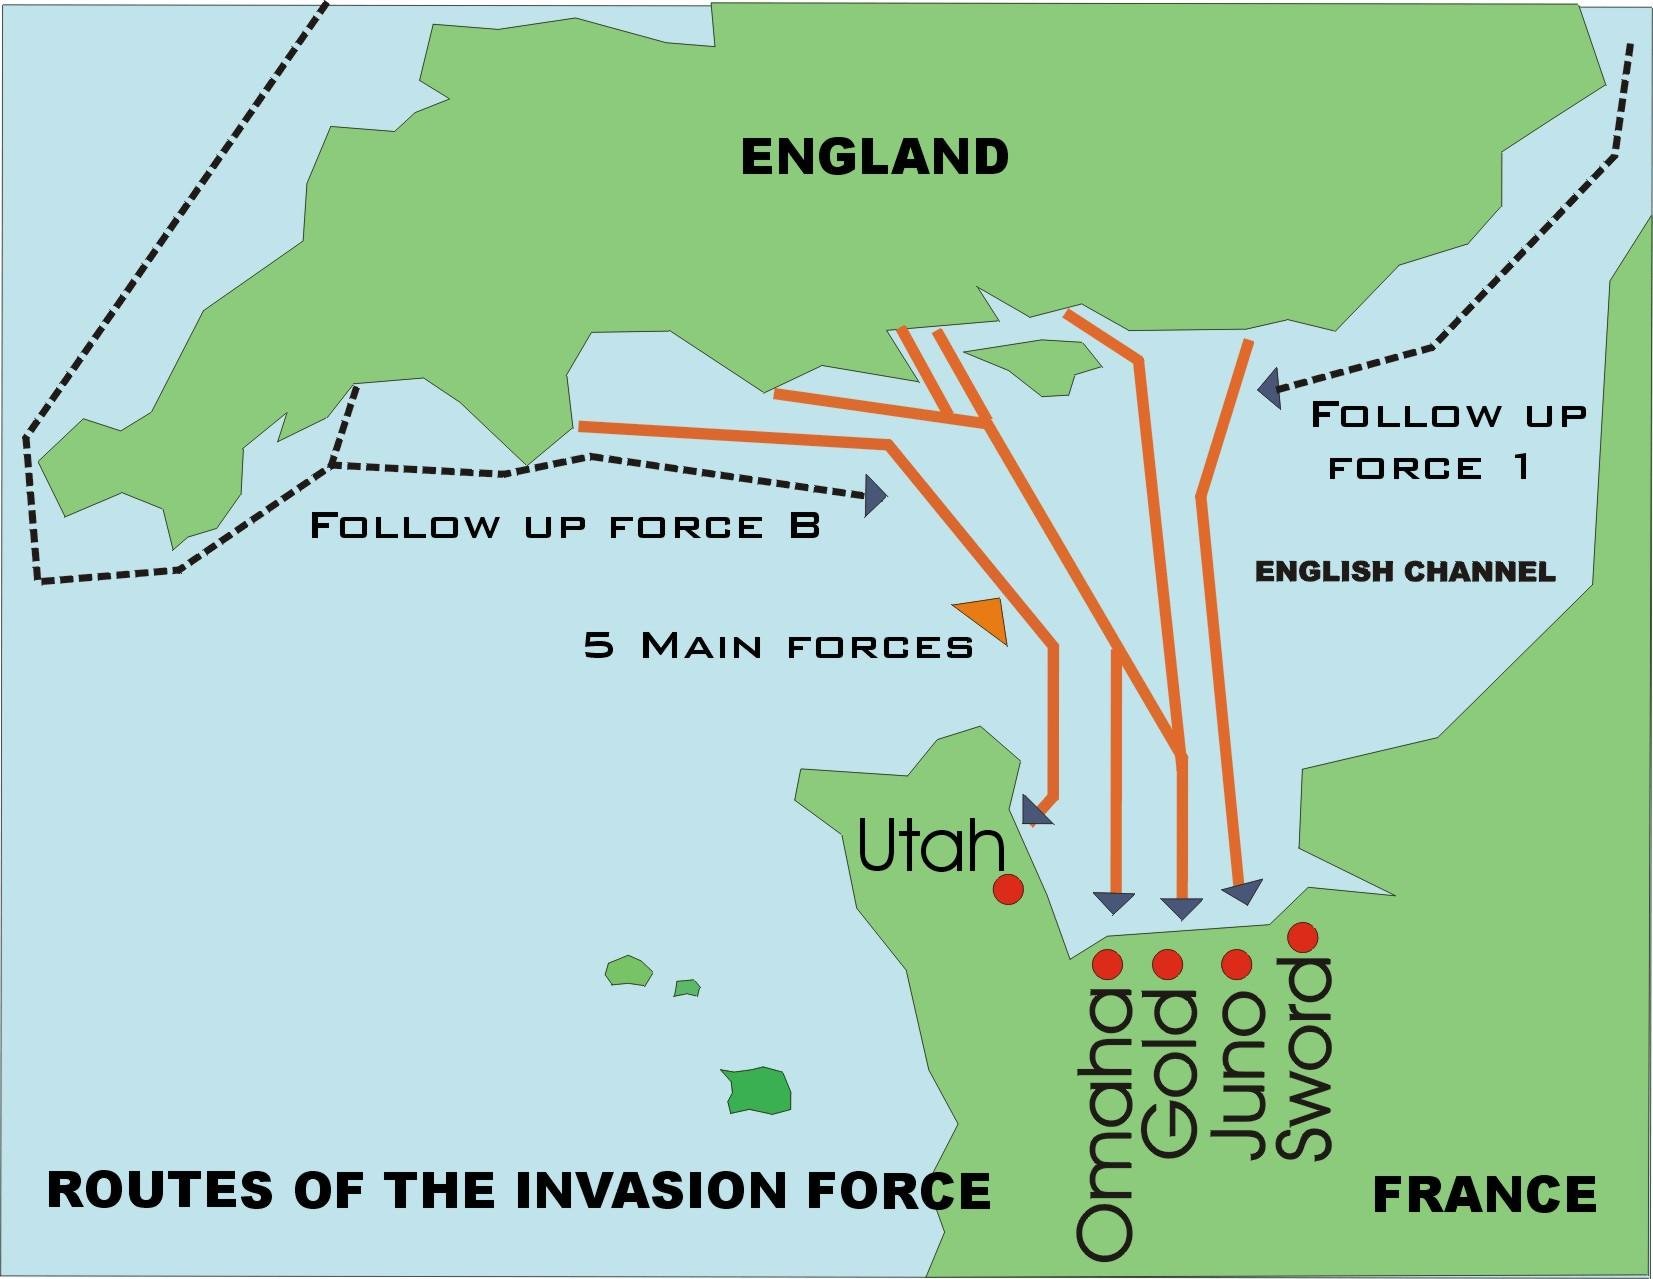 The routes of the various invasion forces on D-Day